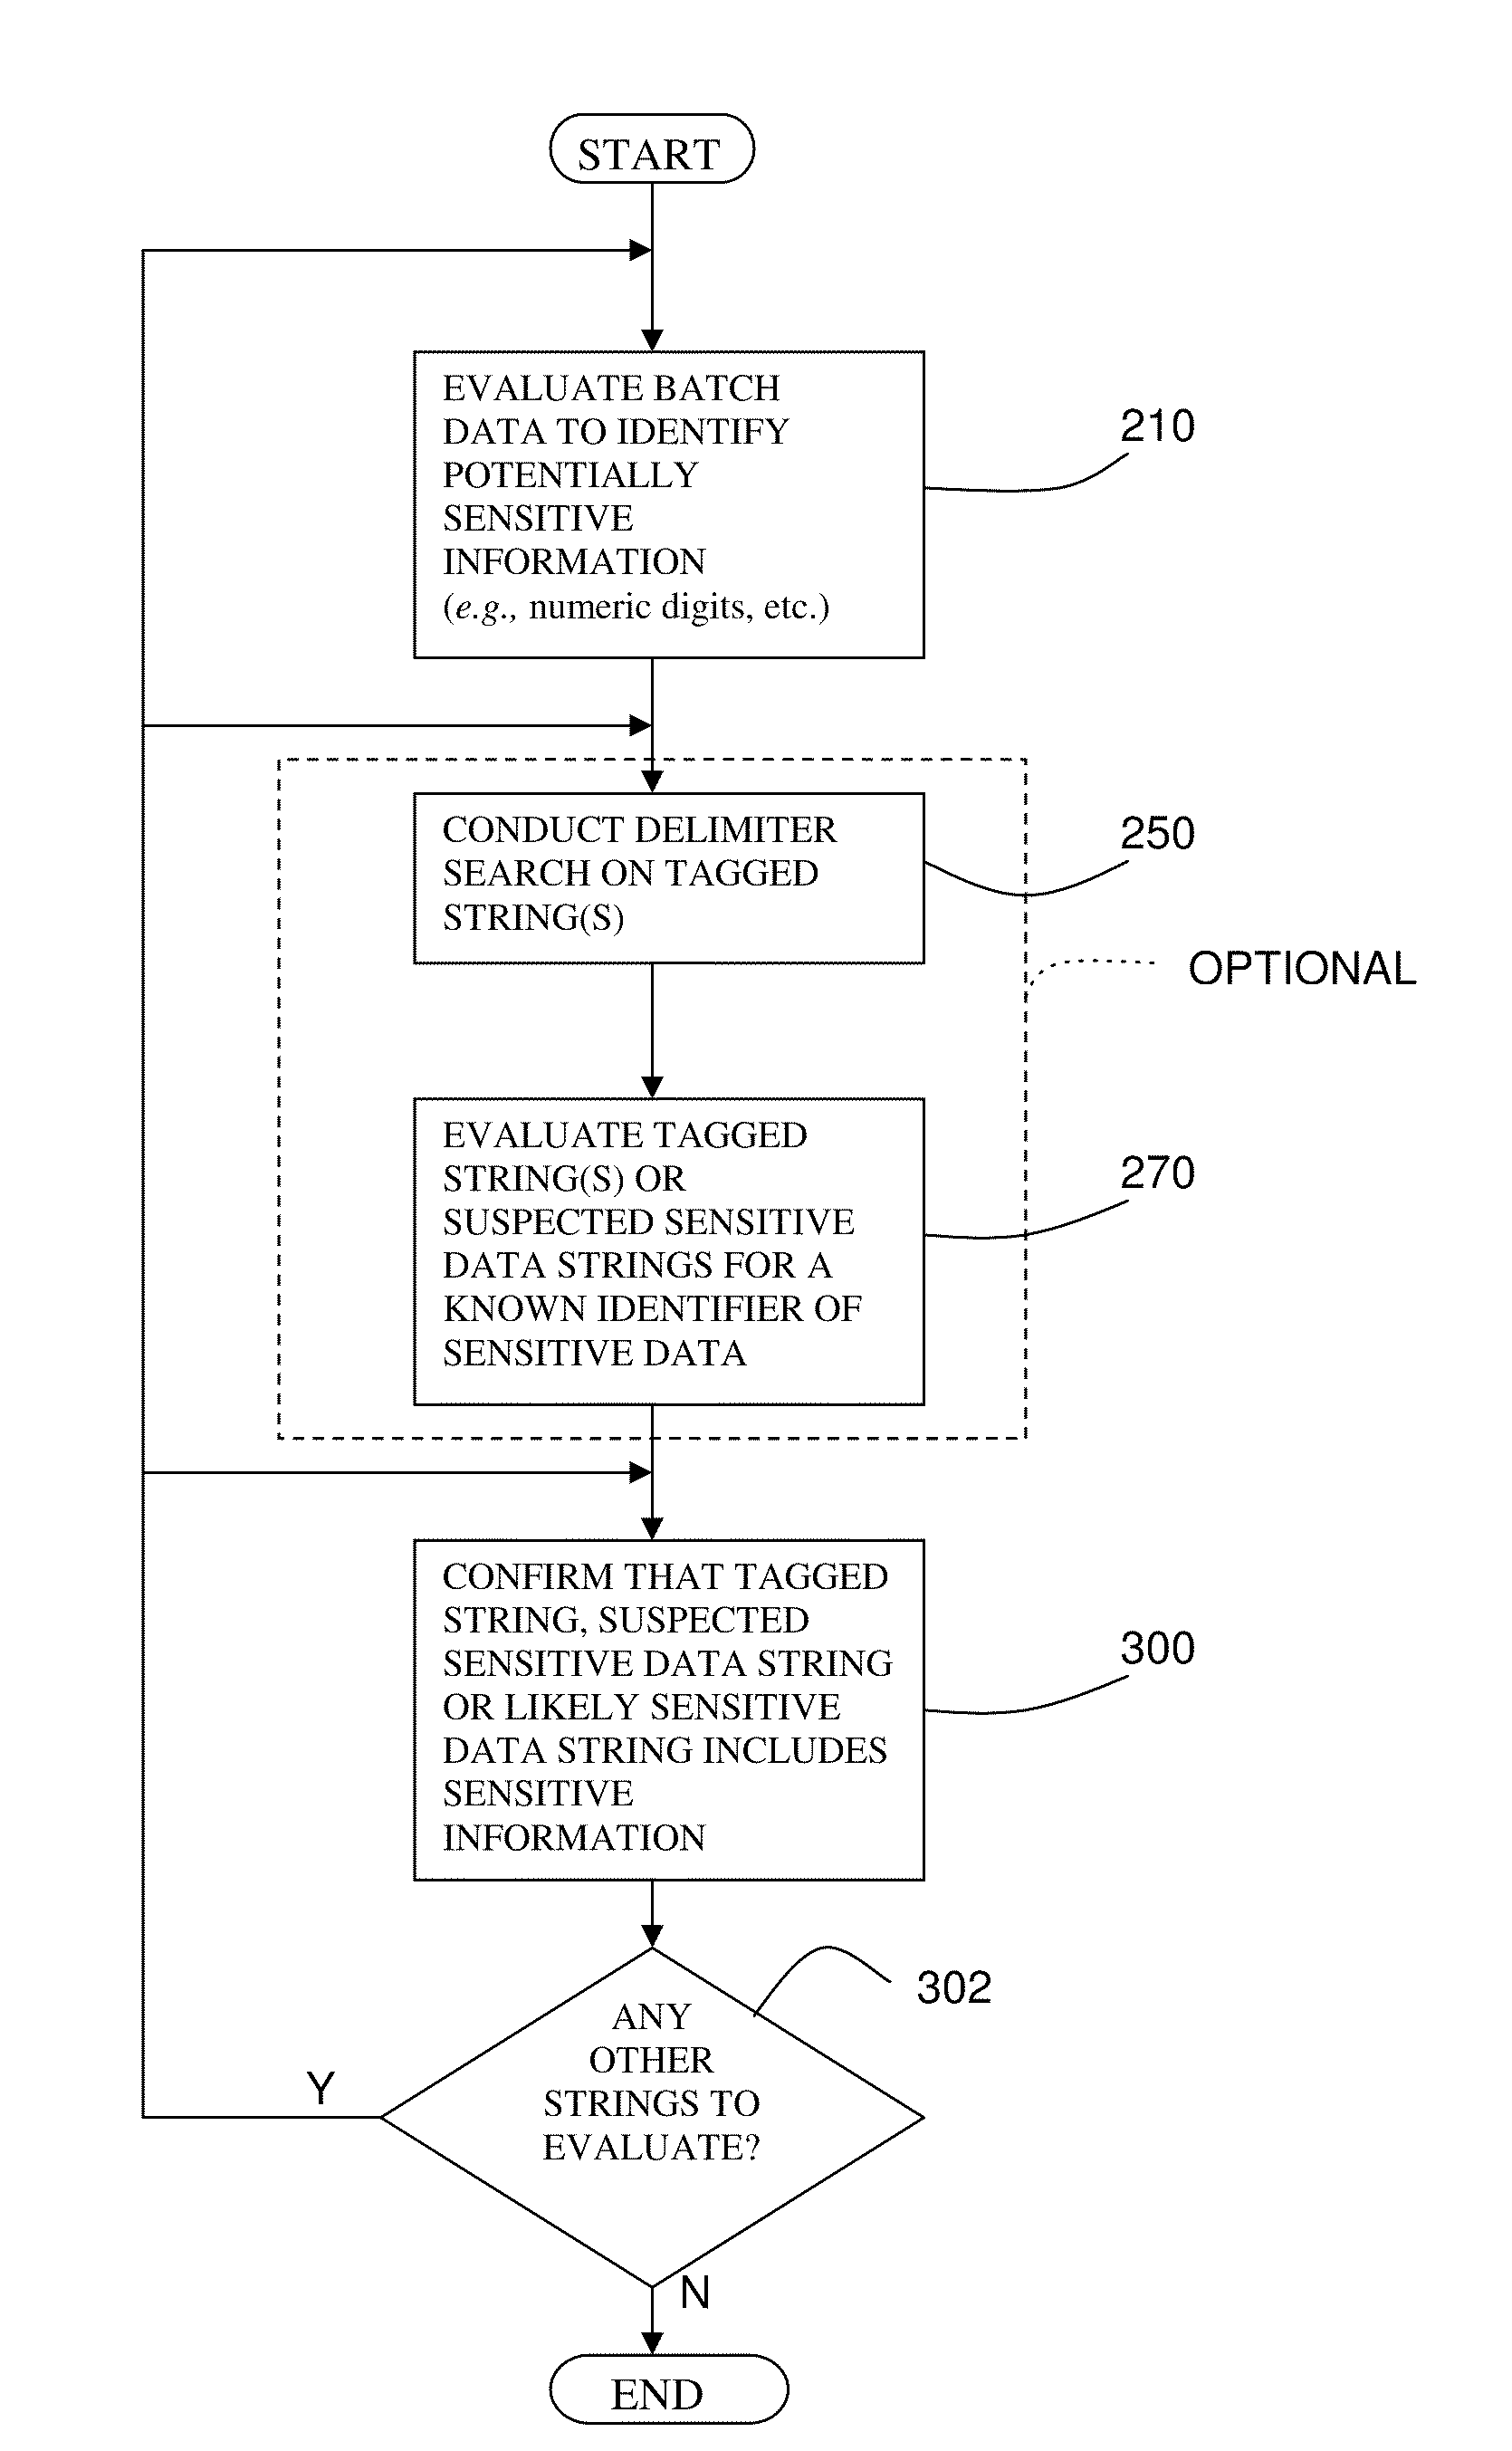 Systems and methods employing intermittent scanning techniques to identify sensitive information in data